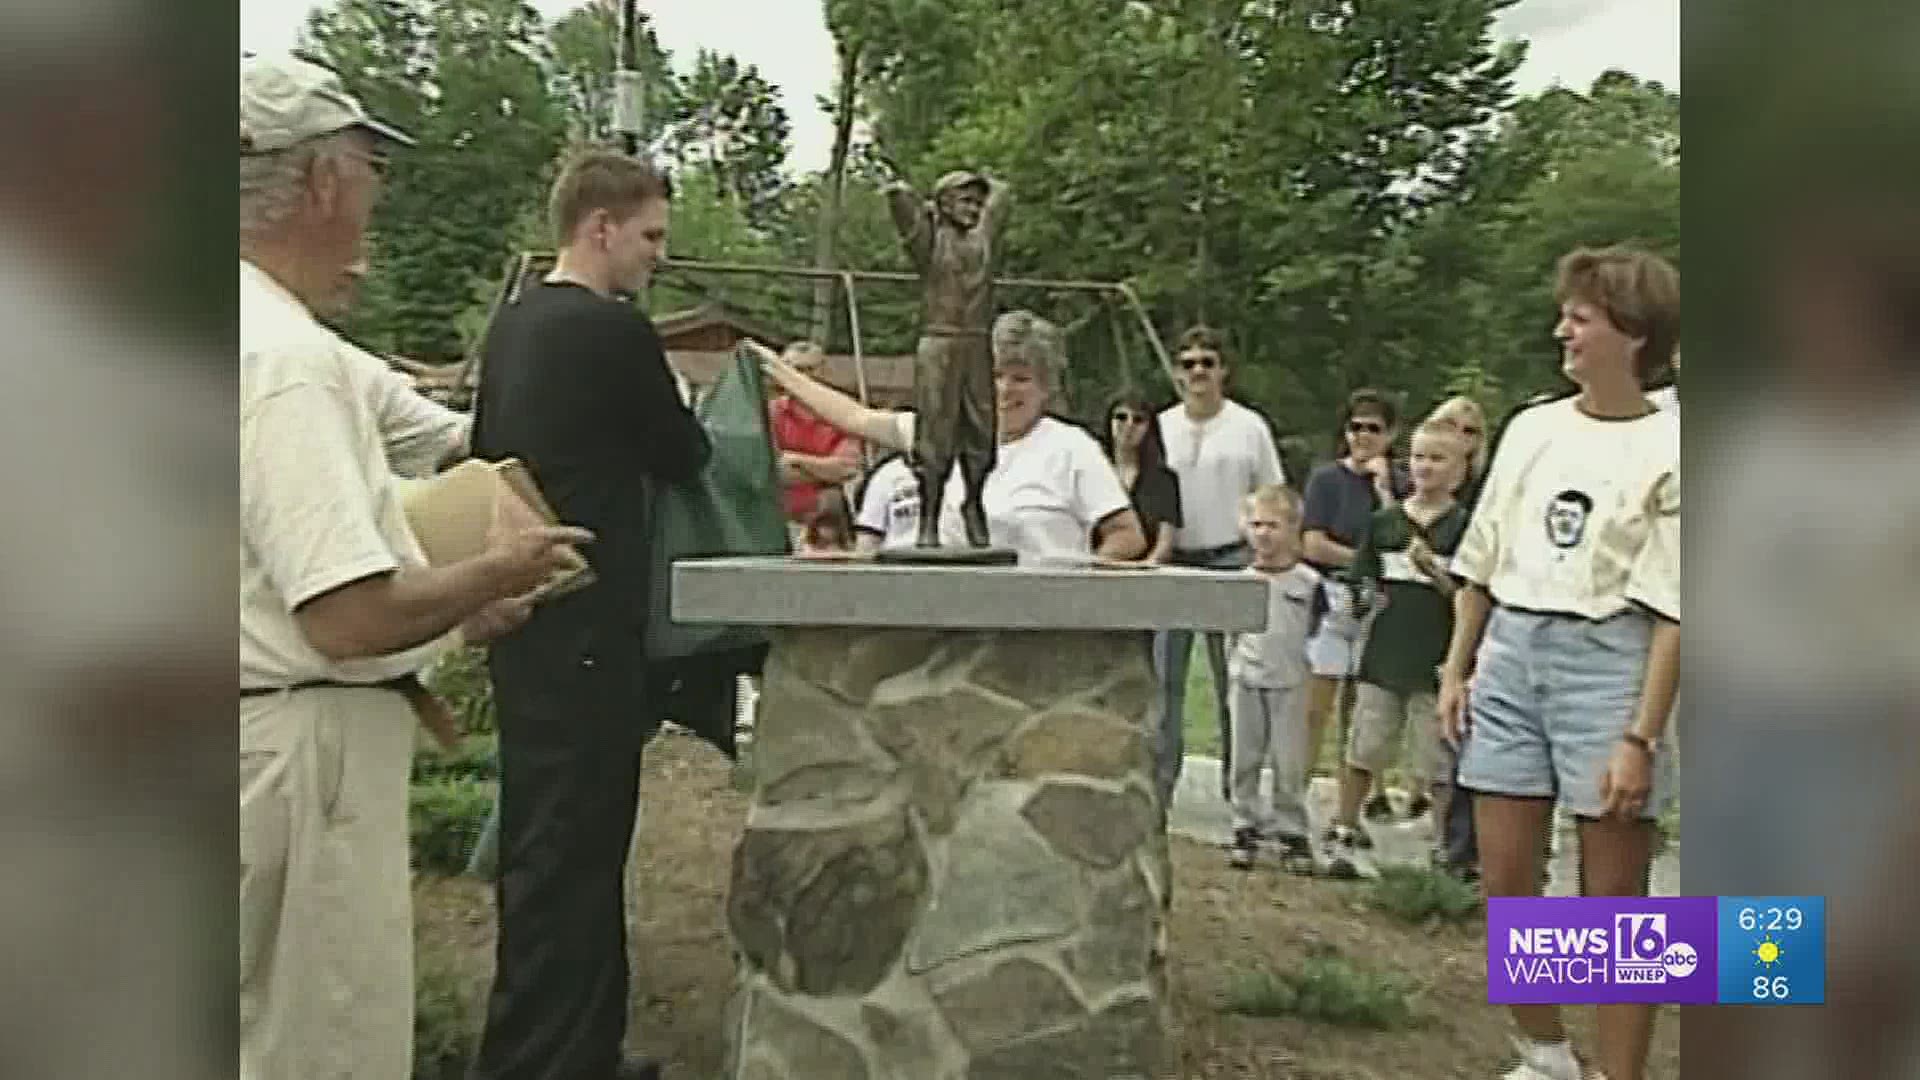 Folks in Factoryville commemorated their local legend back in 2000 with a statue in a borough park.